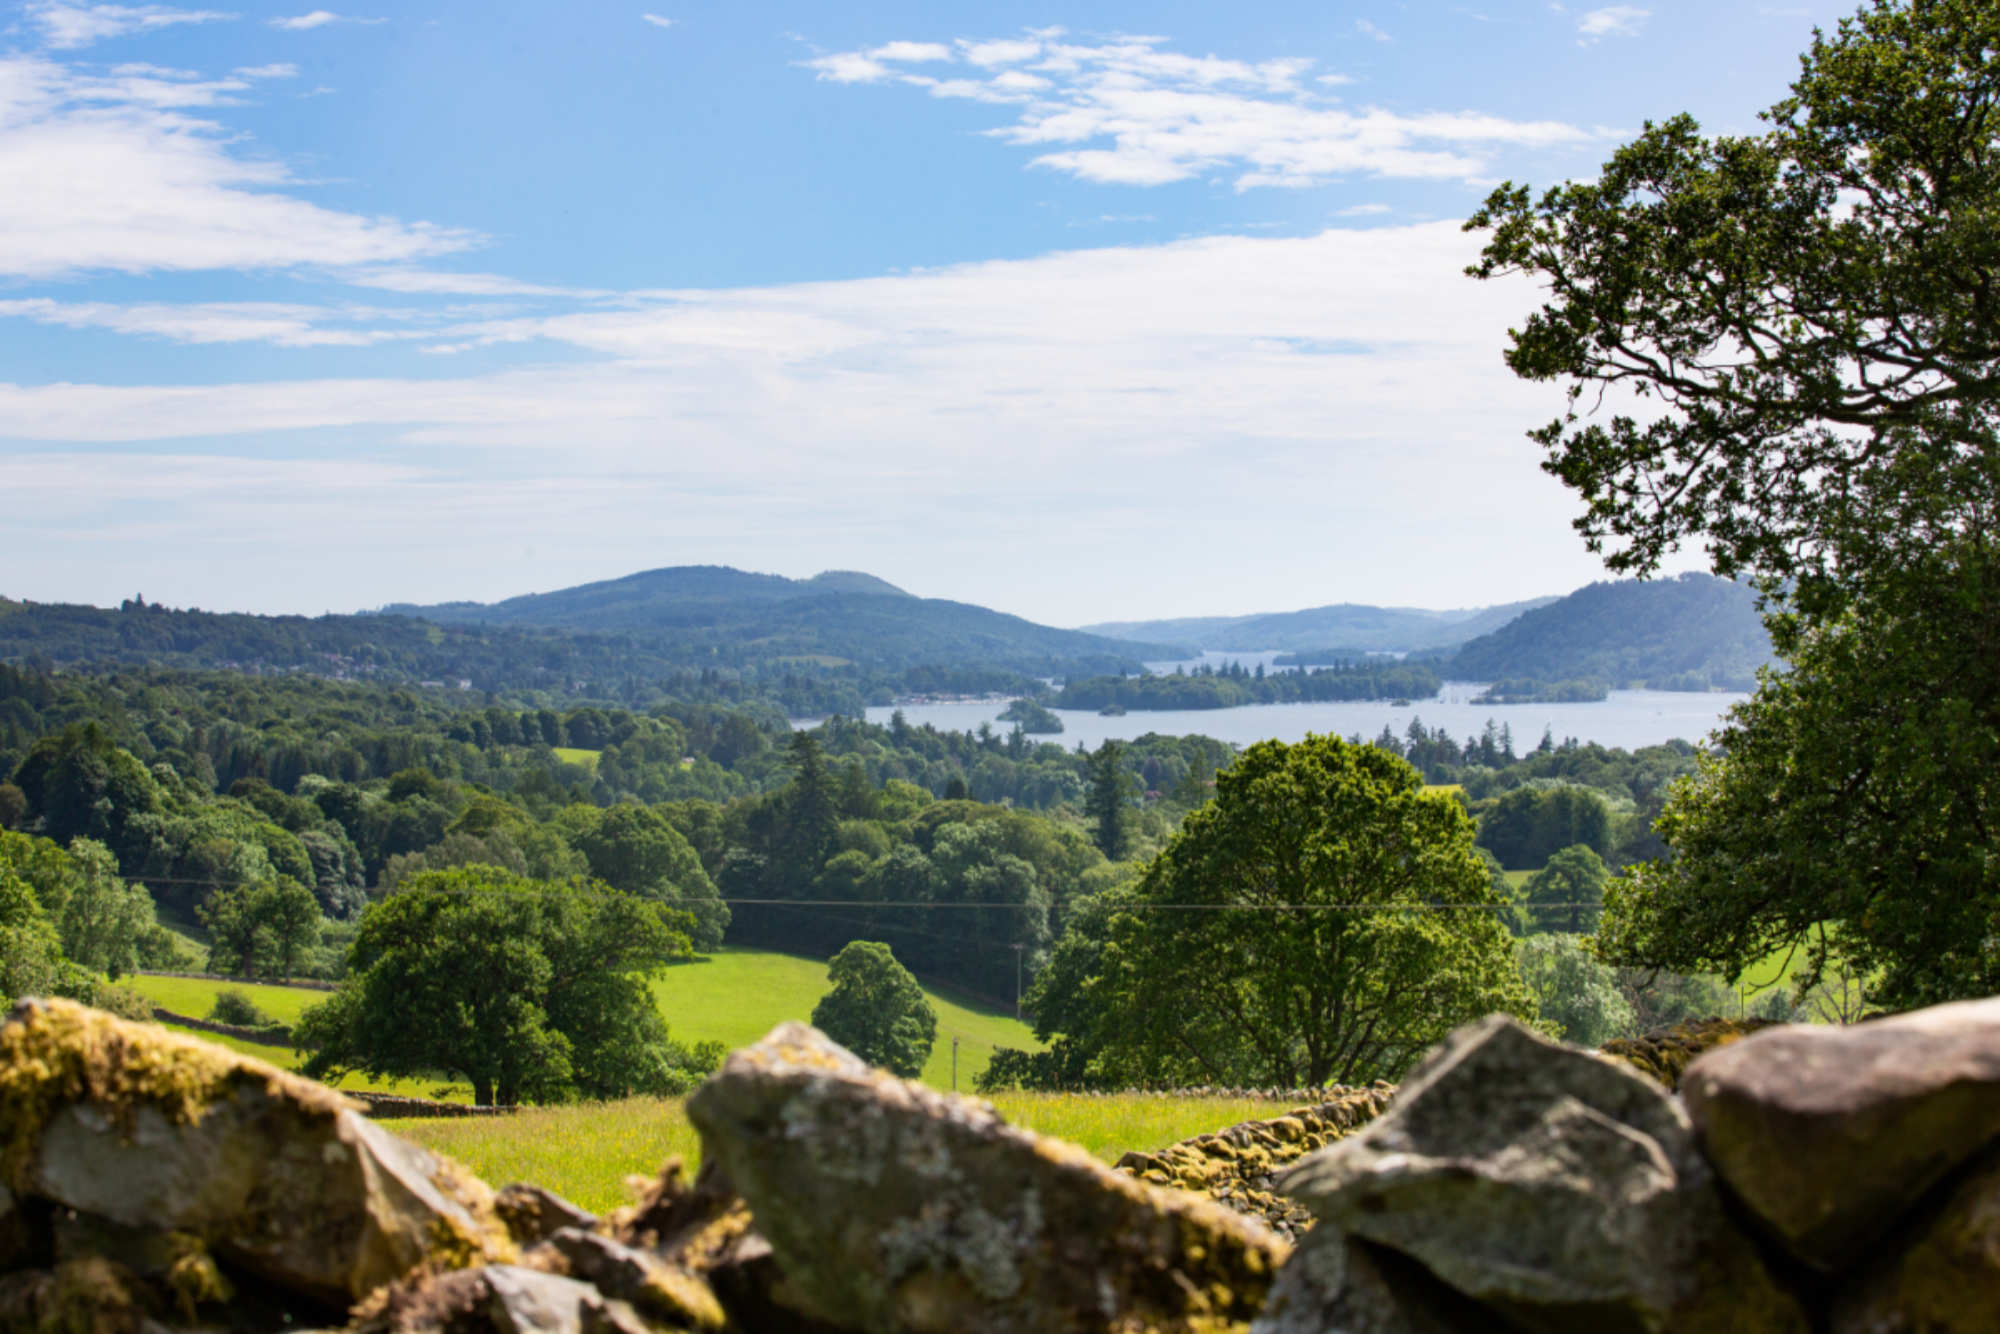 The view from YHA Windermere